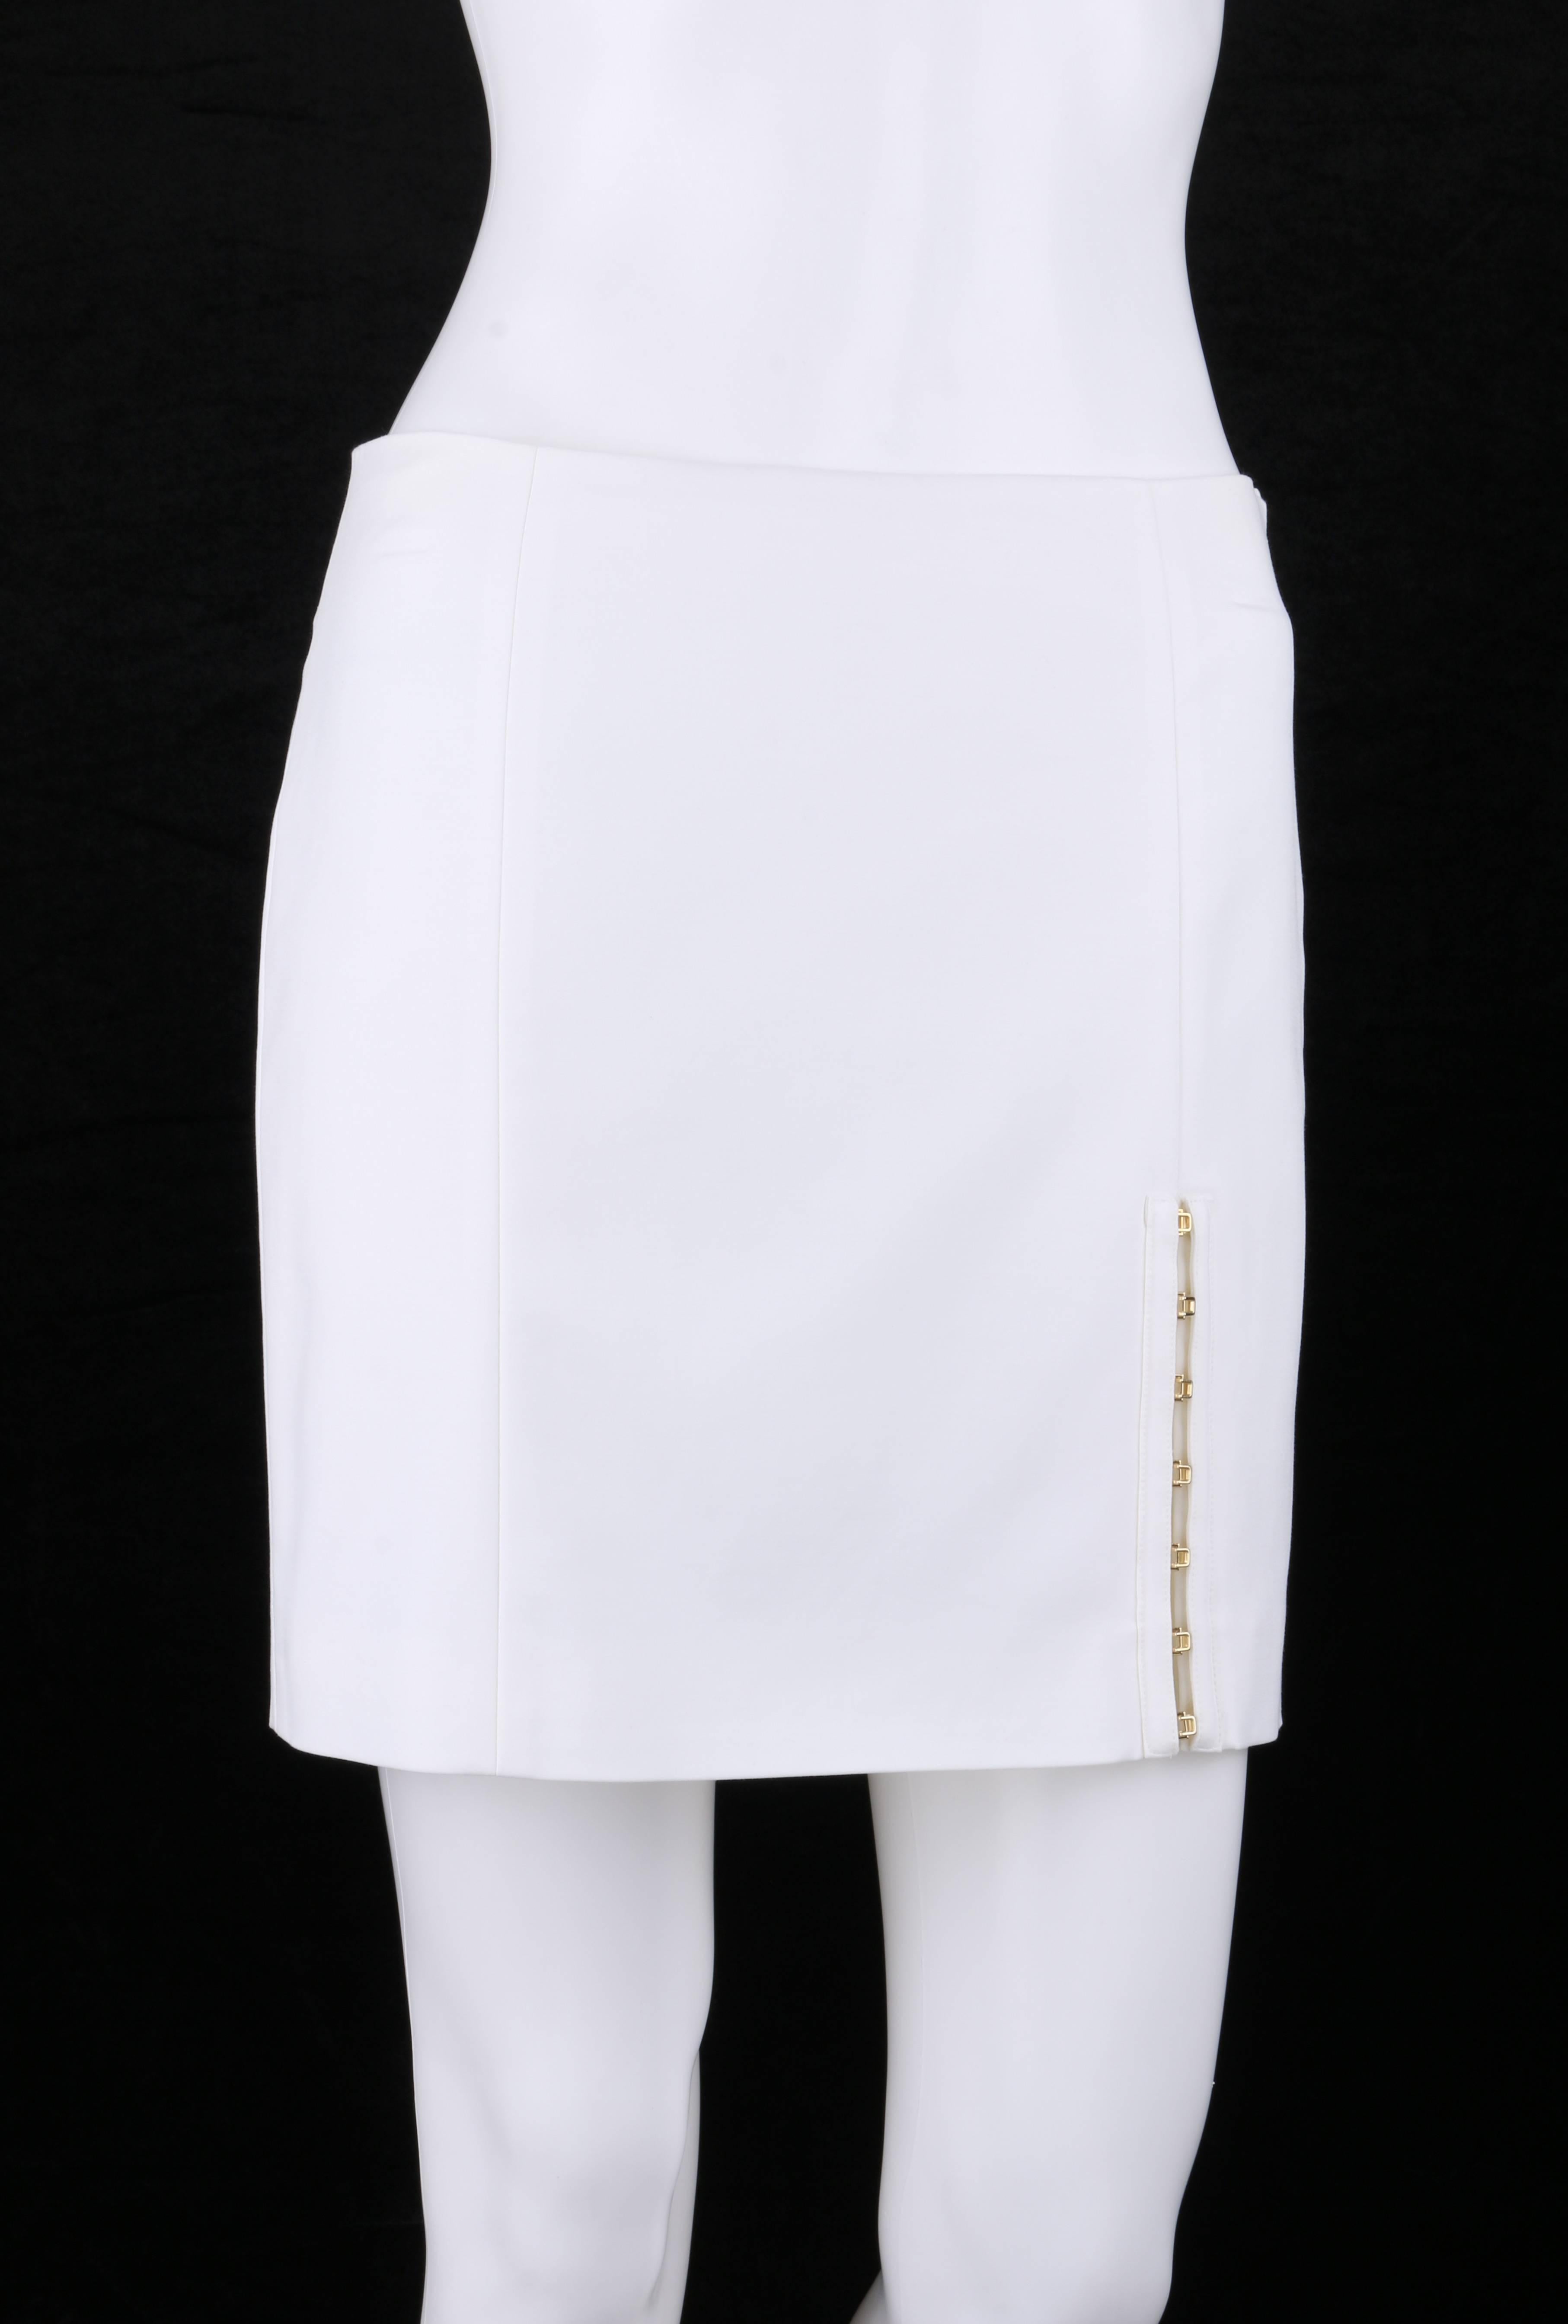 Versace Spring/Summer 2011 white stretch cotton gold hook detail mini skirt; New with tags. Six panel mini skirt. Front side seam slit with seven gold-toned hook and eye closures. Left side seam invisible zipper with hook and loop closure at top.